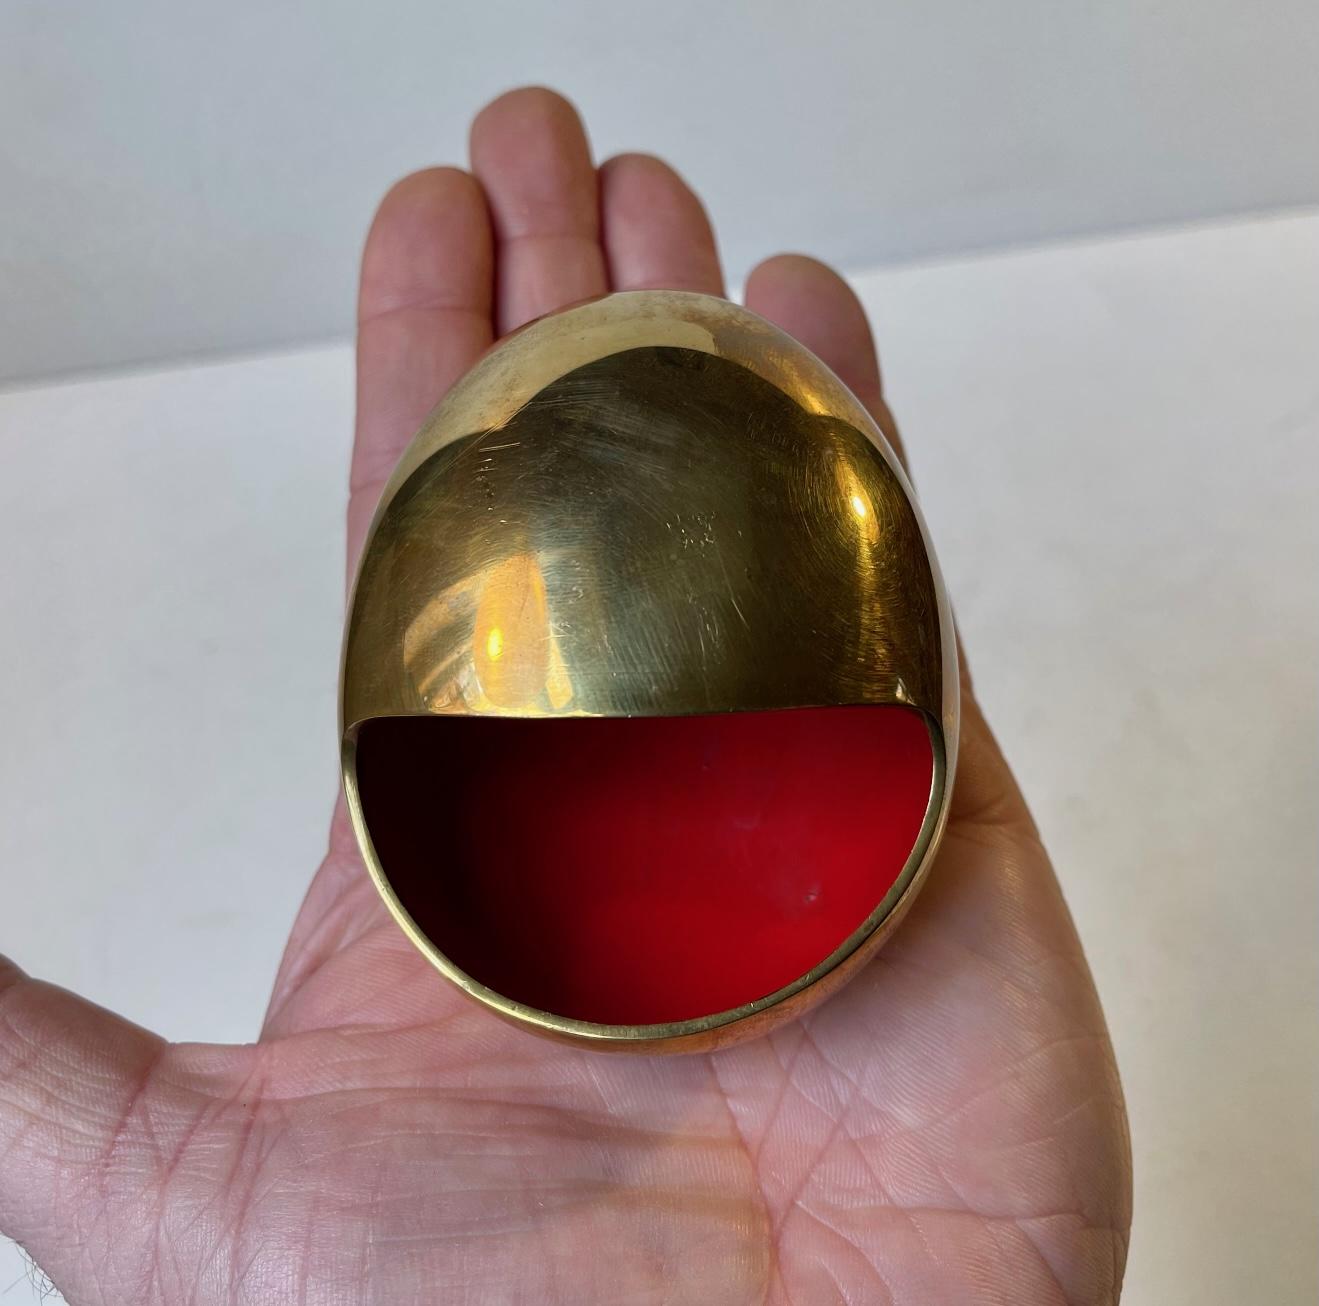 Iconic egg shaped Brass Ashtray with bright red interior enamel. It is called the smile and was designed by Hans Bunde and manufactured by Carl Cohr in Fredericia Denmark during the 1950s. Stamped Cohr, Denmark - to the base. It remains in beautiful